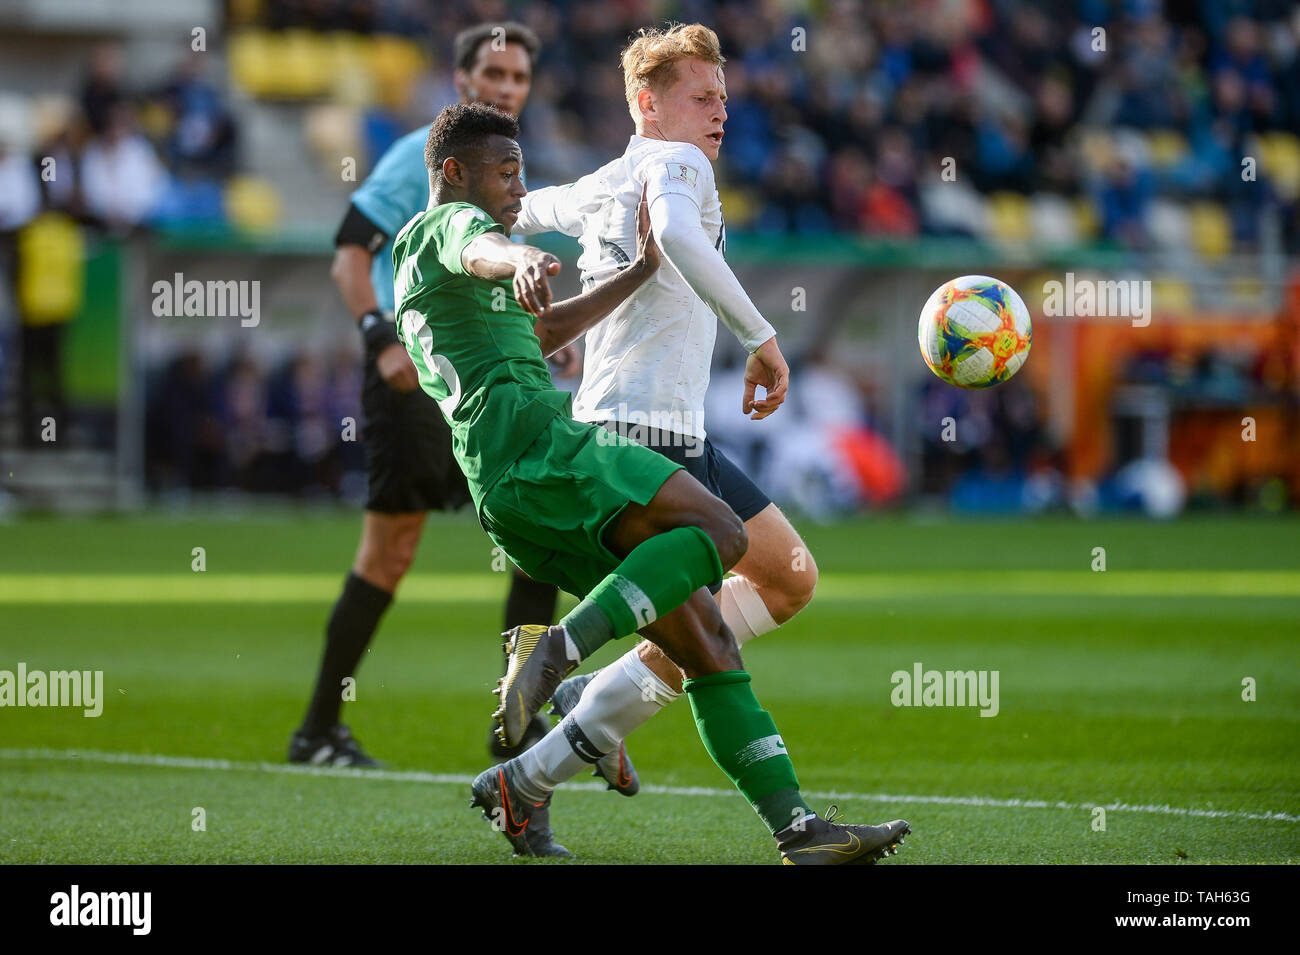 Muhannad Alshanqiti from Saudi Arabia (L) and Nicolas Cozza from France (R) are seen in action during FIFA U-20 World Cup match between France and Saudi Arabia (GROUP E) in Gdynia. ( Final score; France 2:0 Saudi Arabia ) Stock Photo